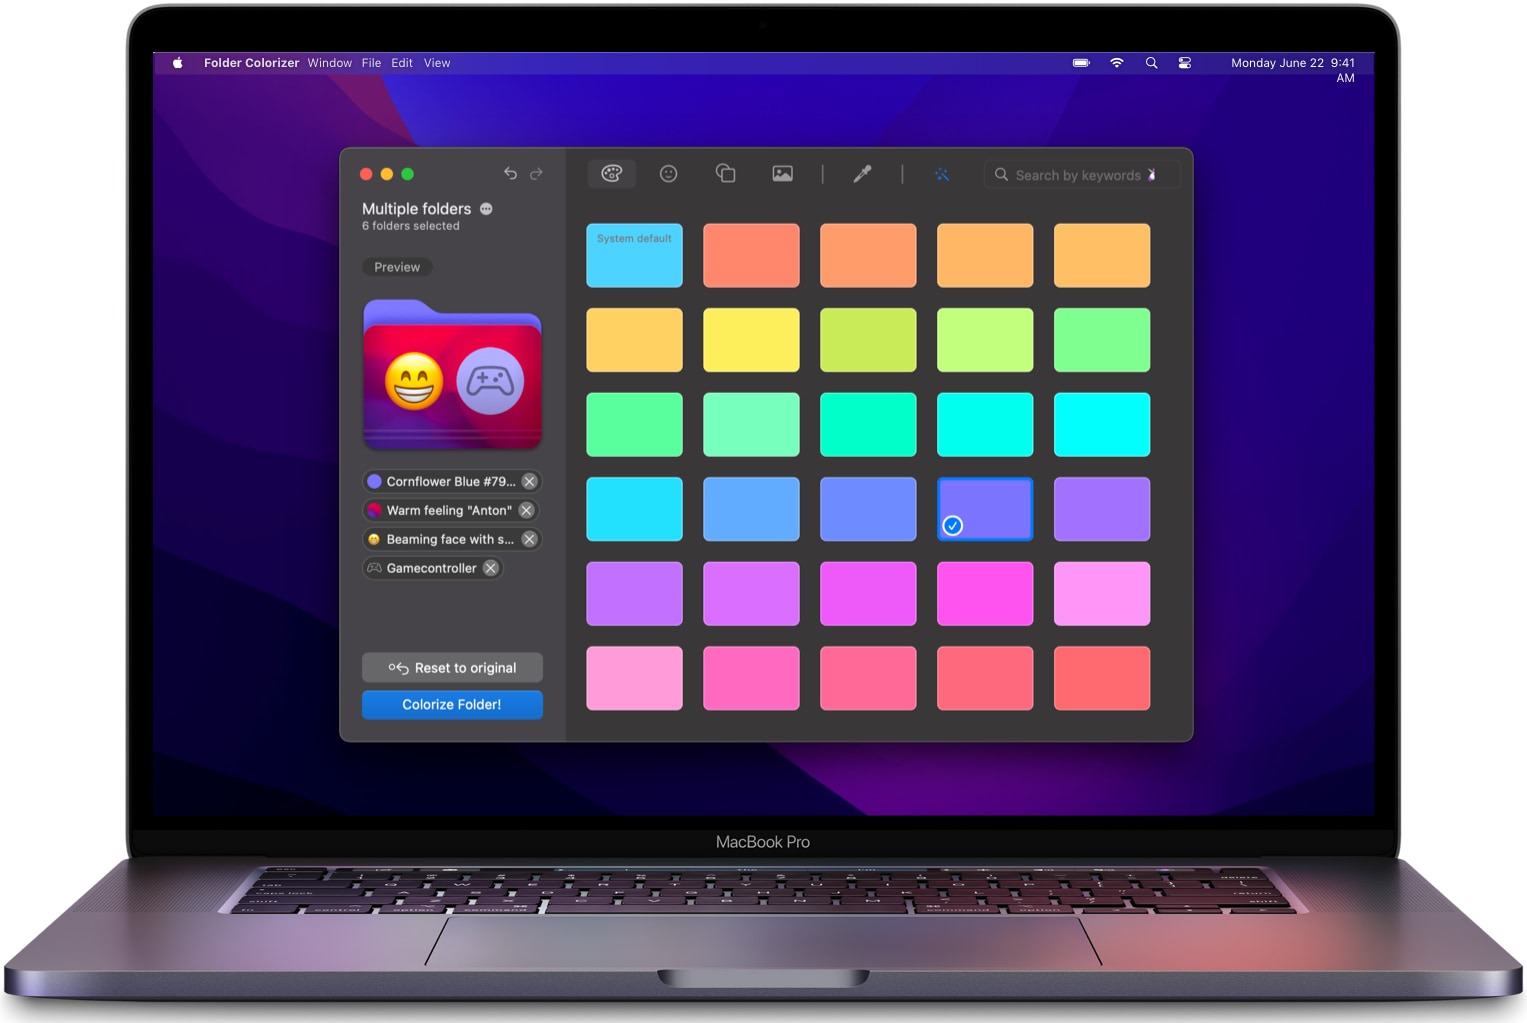 A marketing image from Softorino showcasing its Folder Colorizer app for Mac that makes it easy to change macOS folder color, customize folder icons with emoji, decals, custom image backgrounds and more